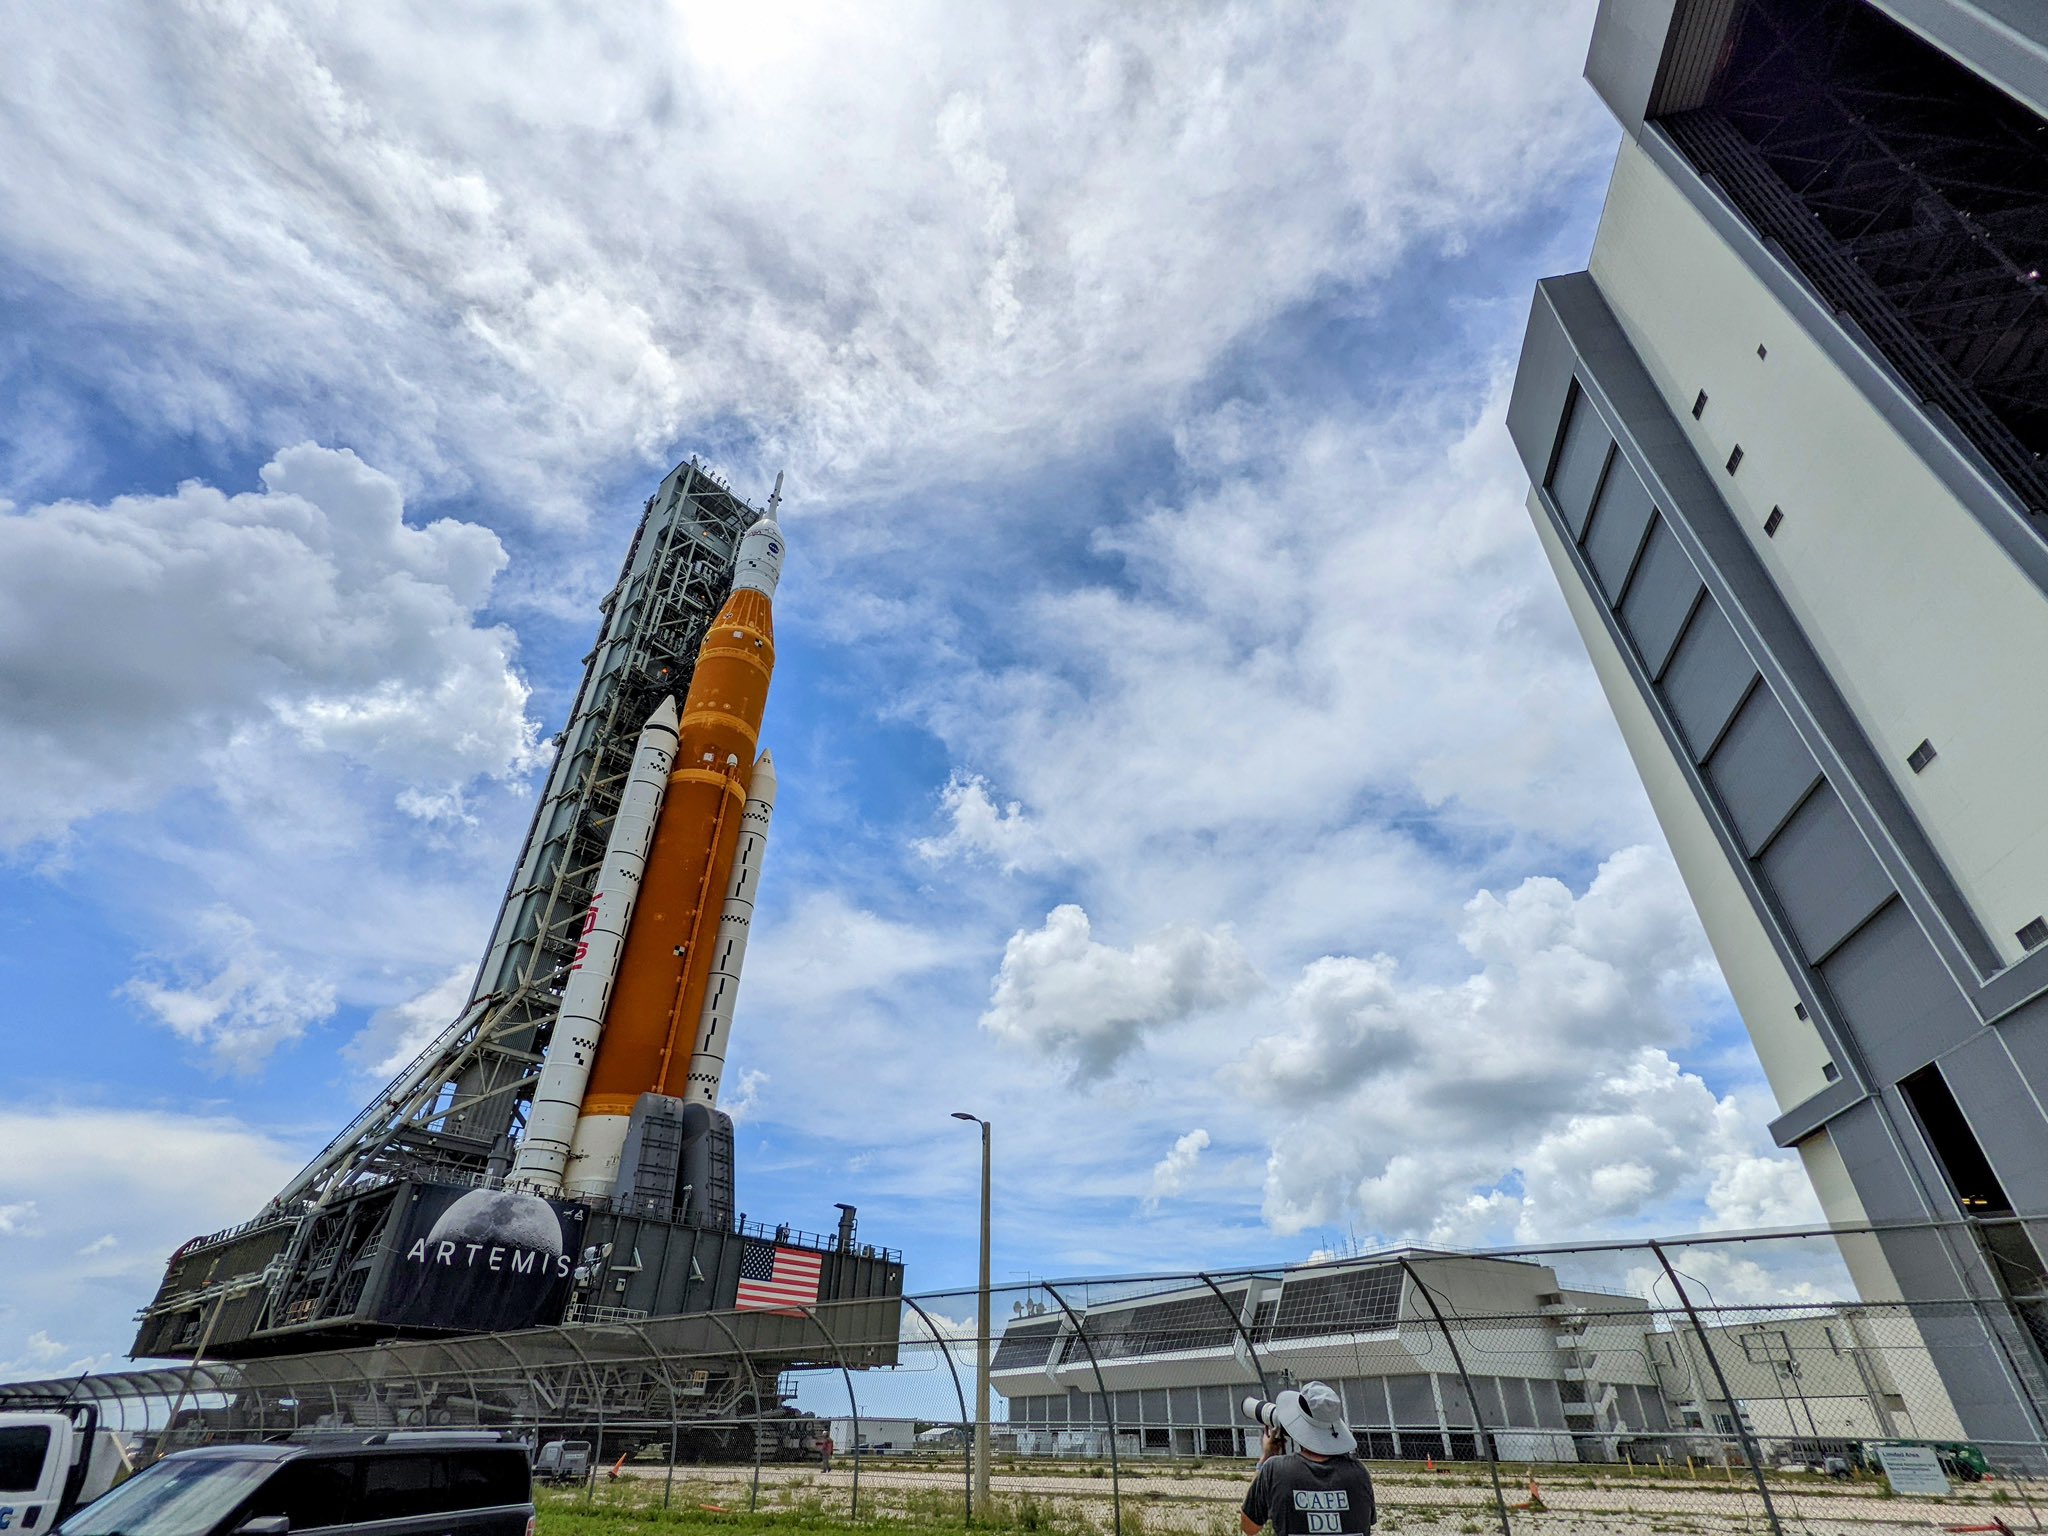 July 2, NASA’s Space Launch System (SLS) rocket and Orion spacecraft for the Artemis I mission were firmly secured inside the Vehicle Assembly Building at Kennedy Space Center. 